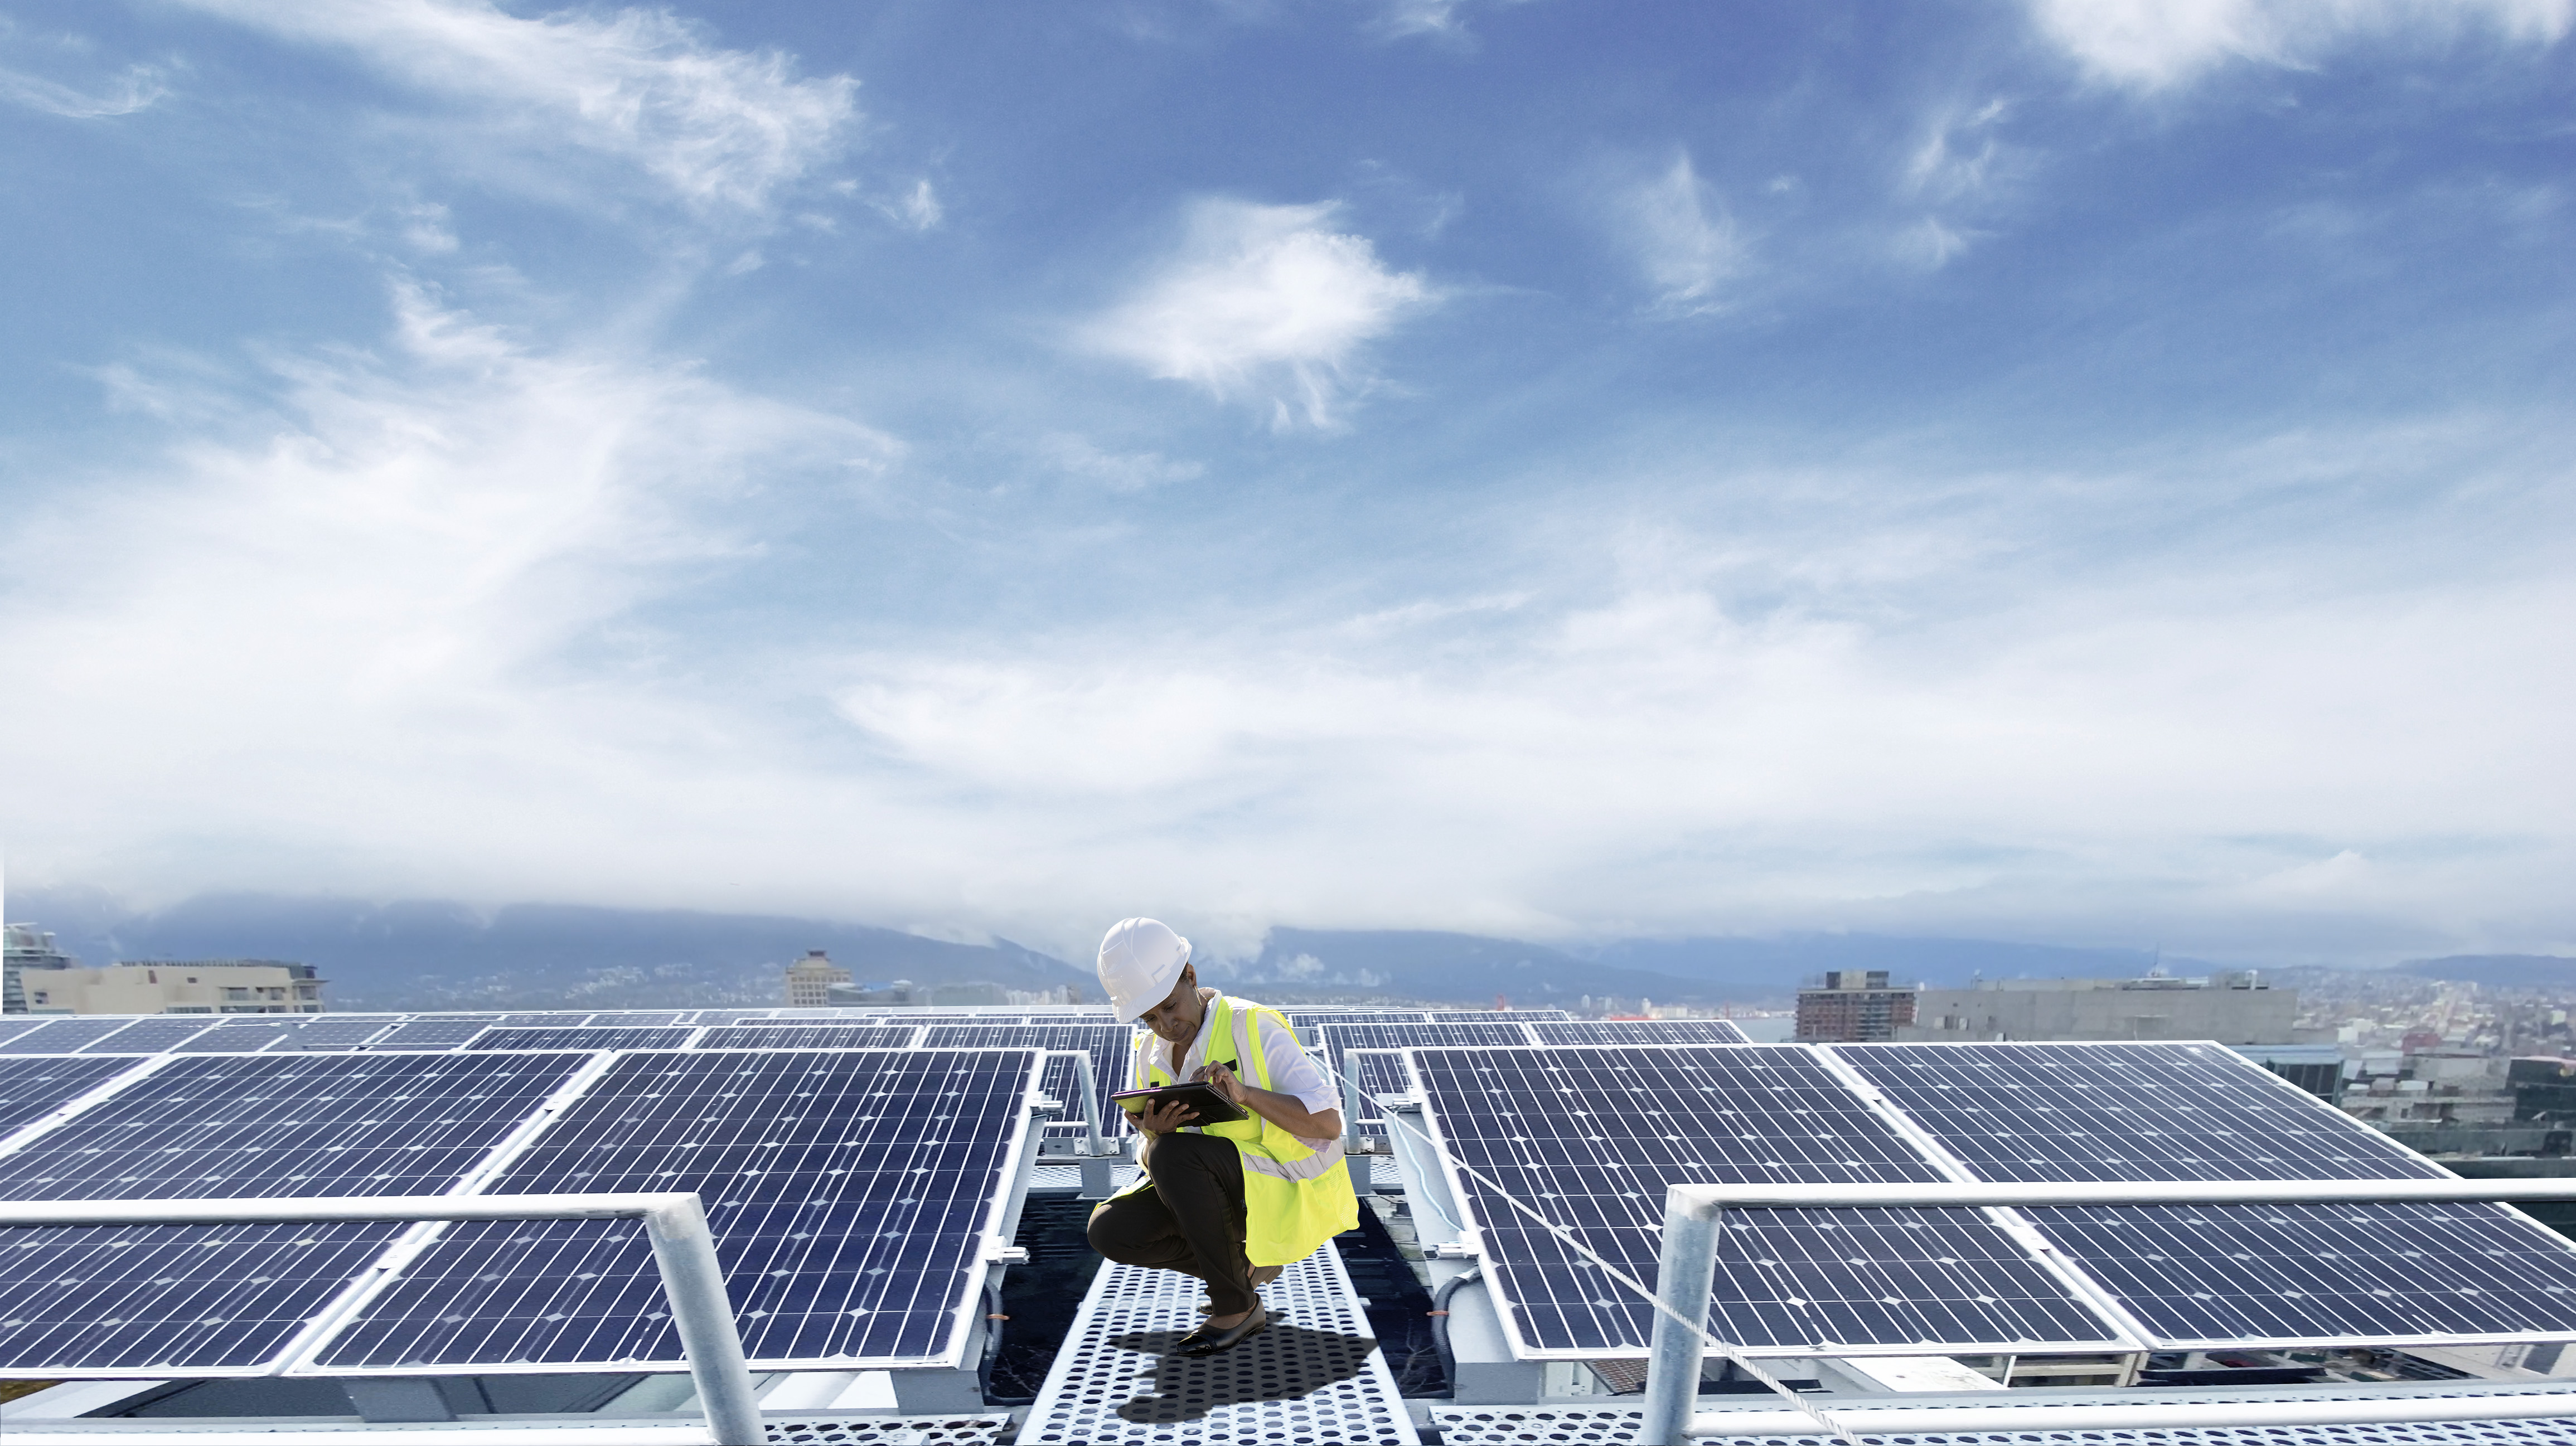 Woman in hard hat and vest working on a tablet amongst industrial solar panels in Canada